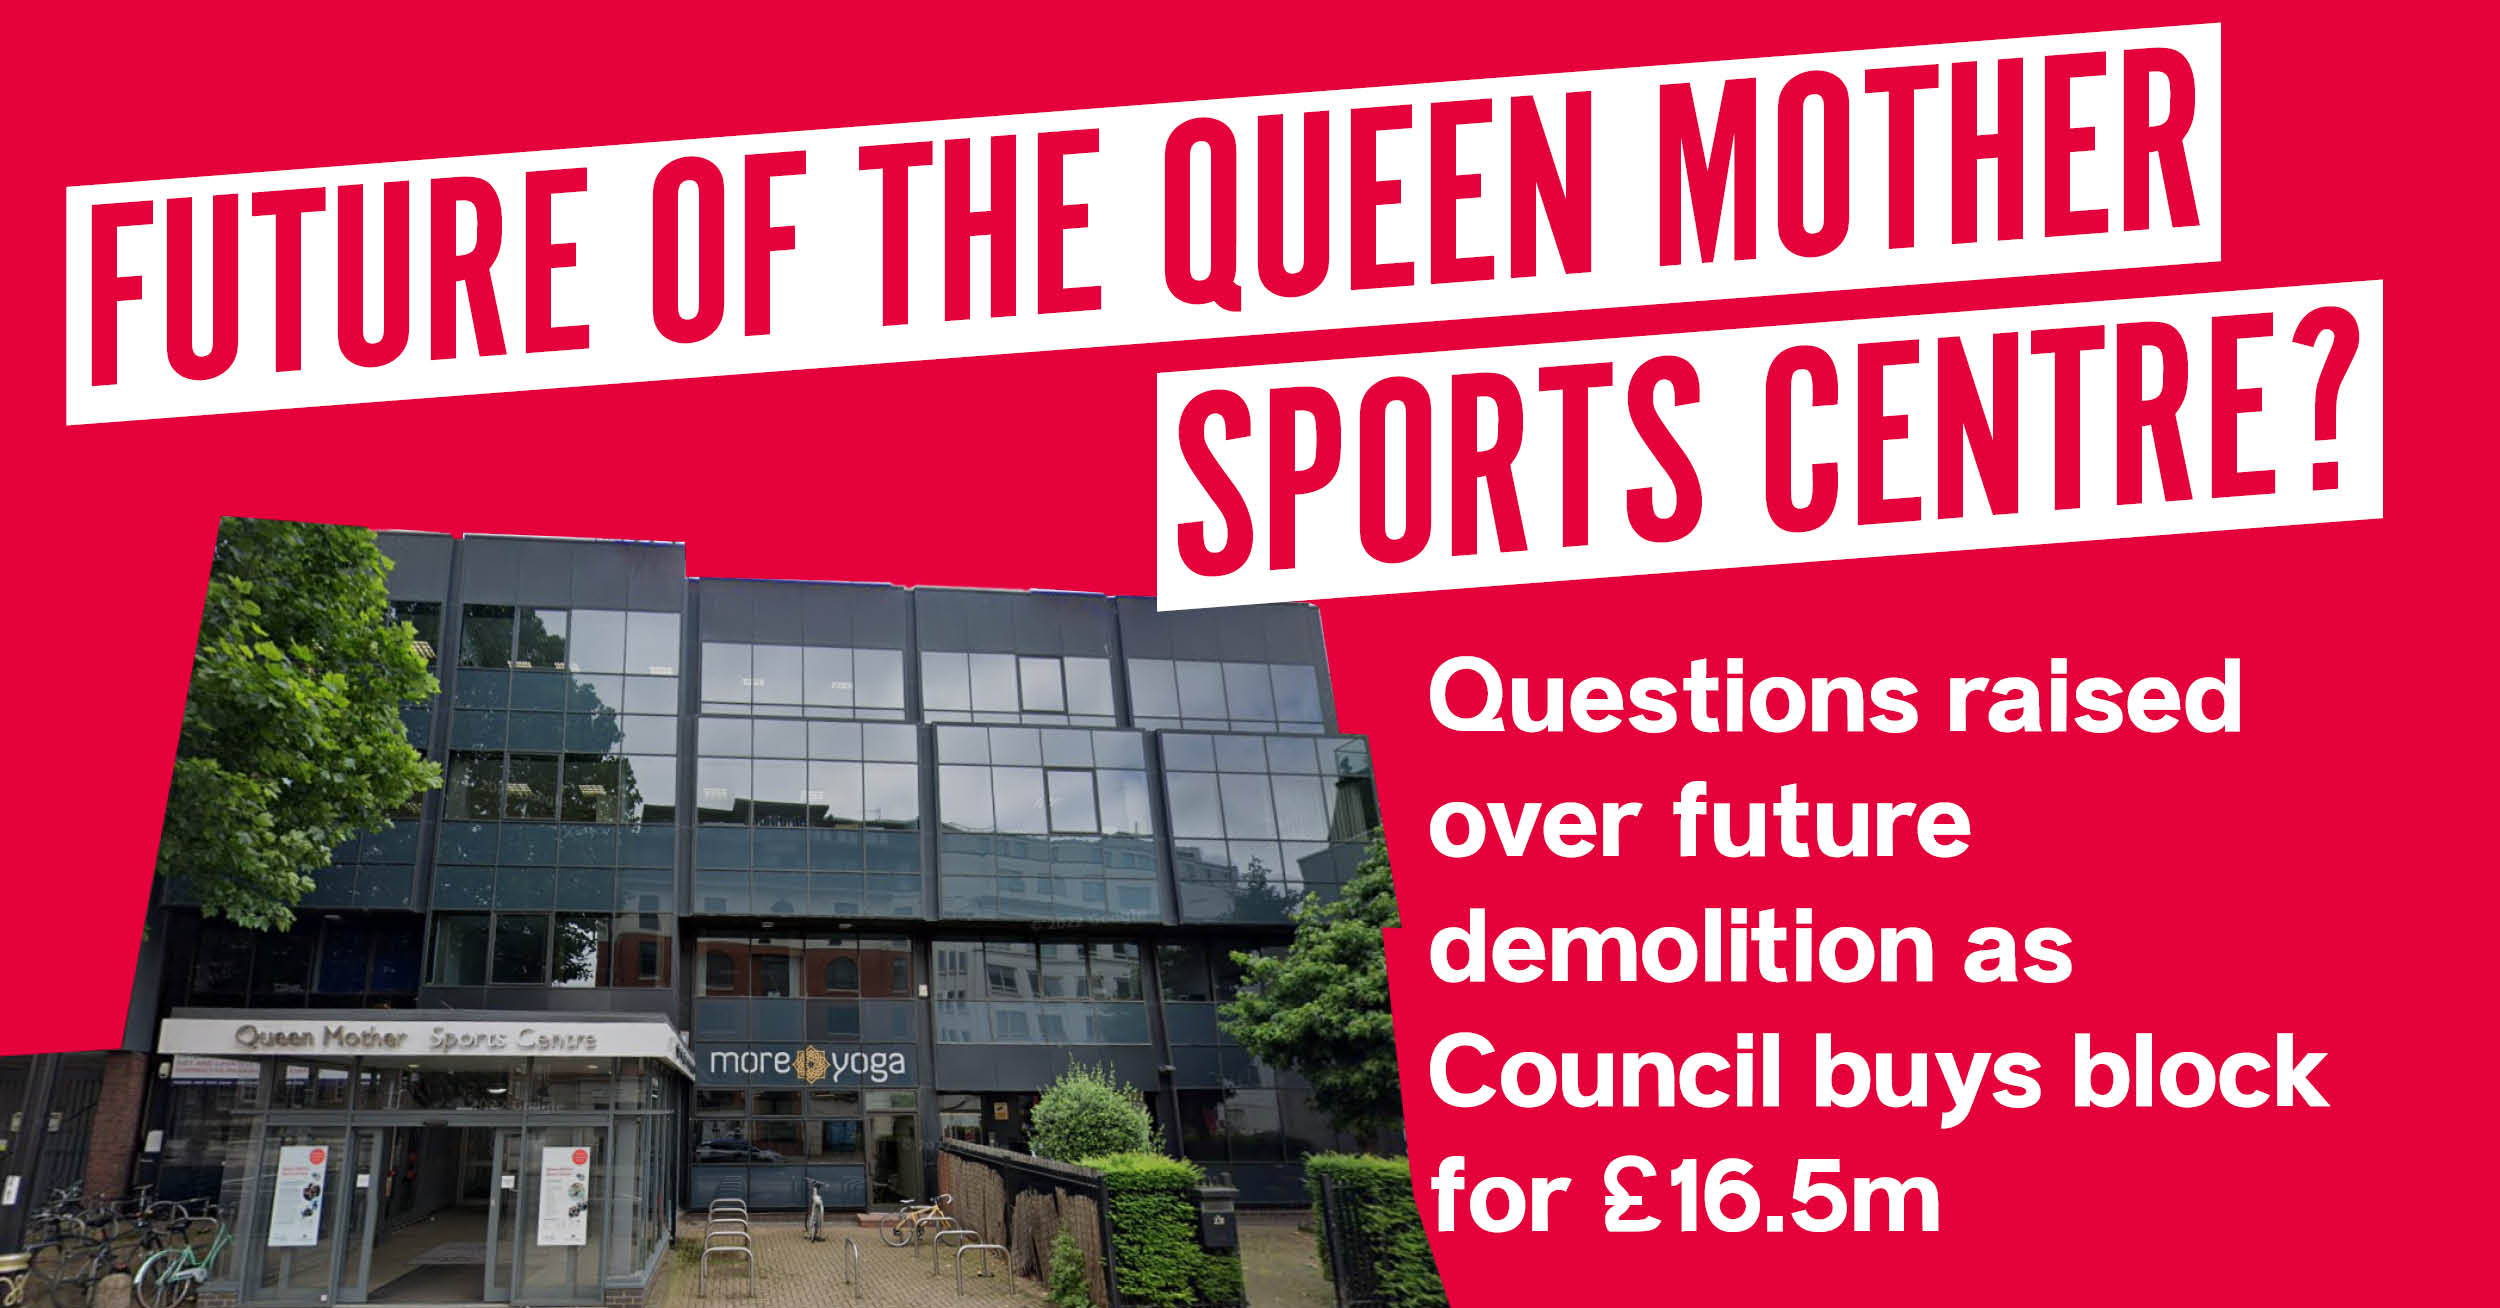 The Queen Mother Sports Centre